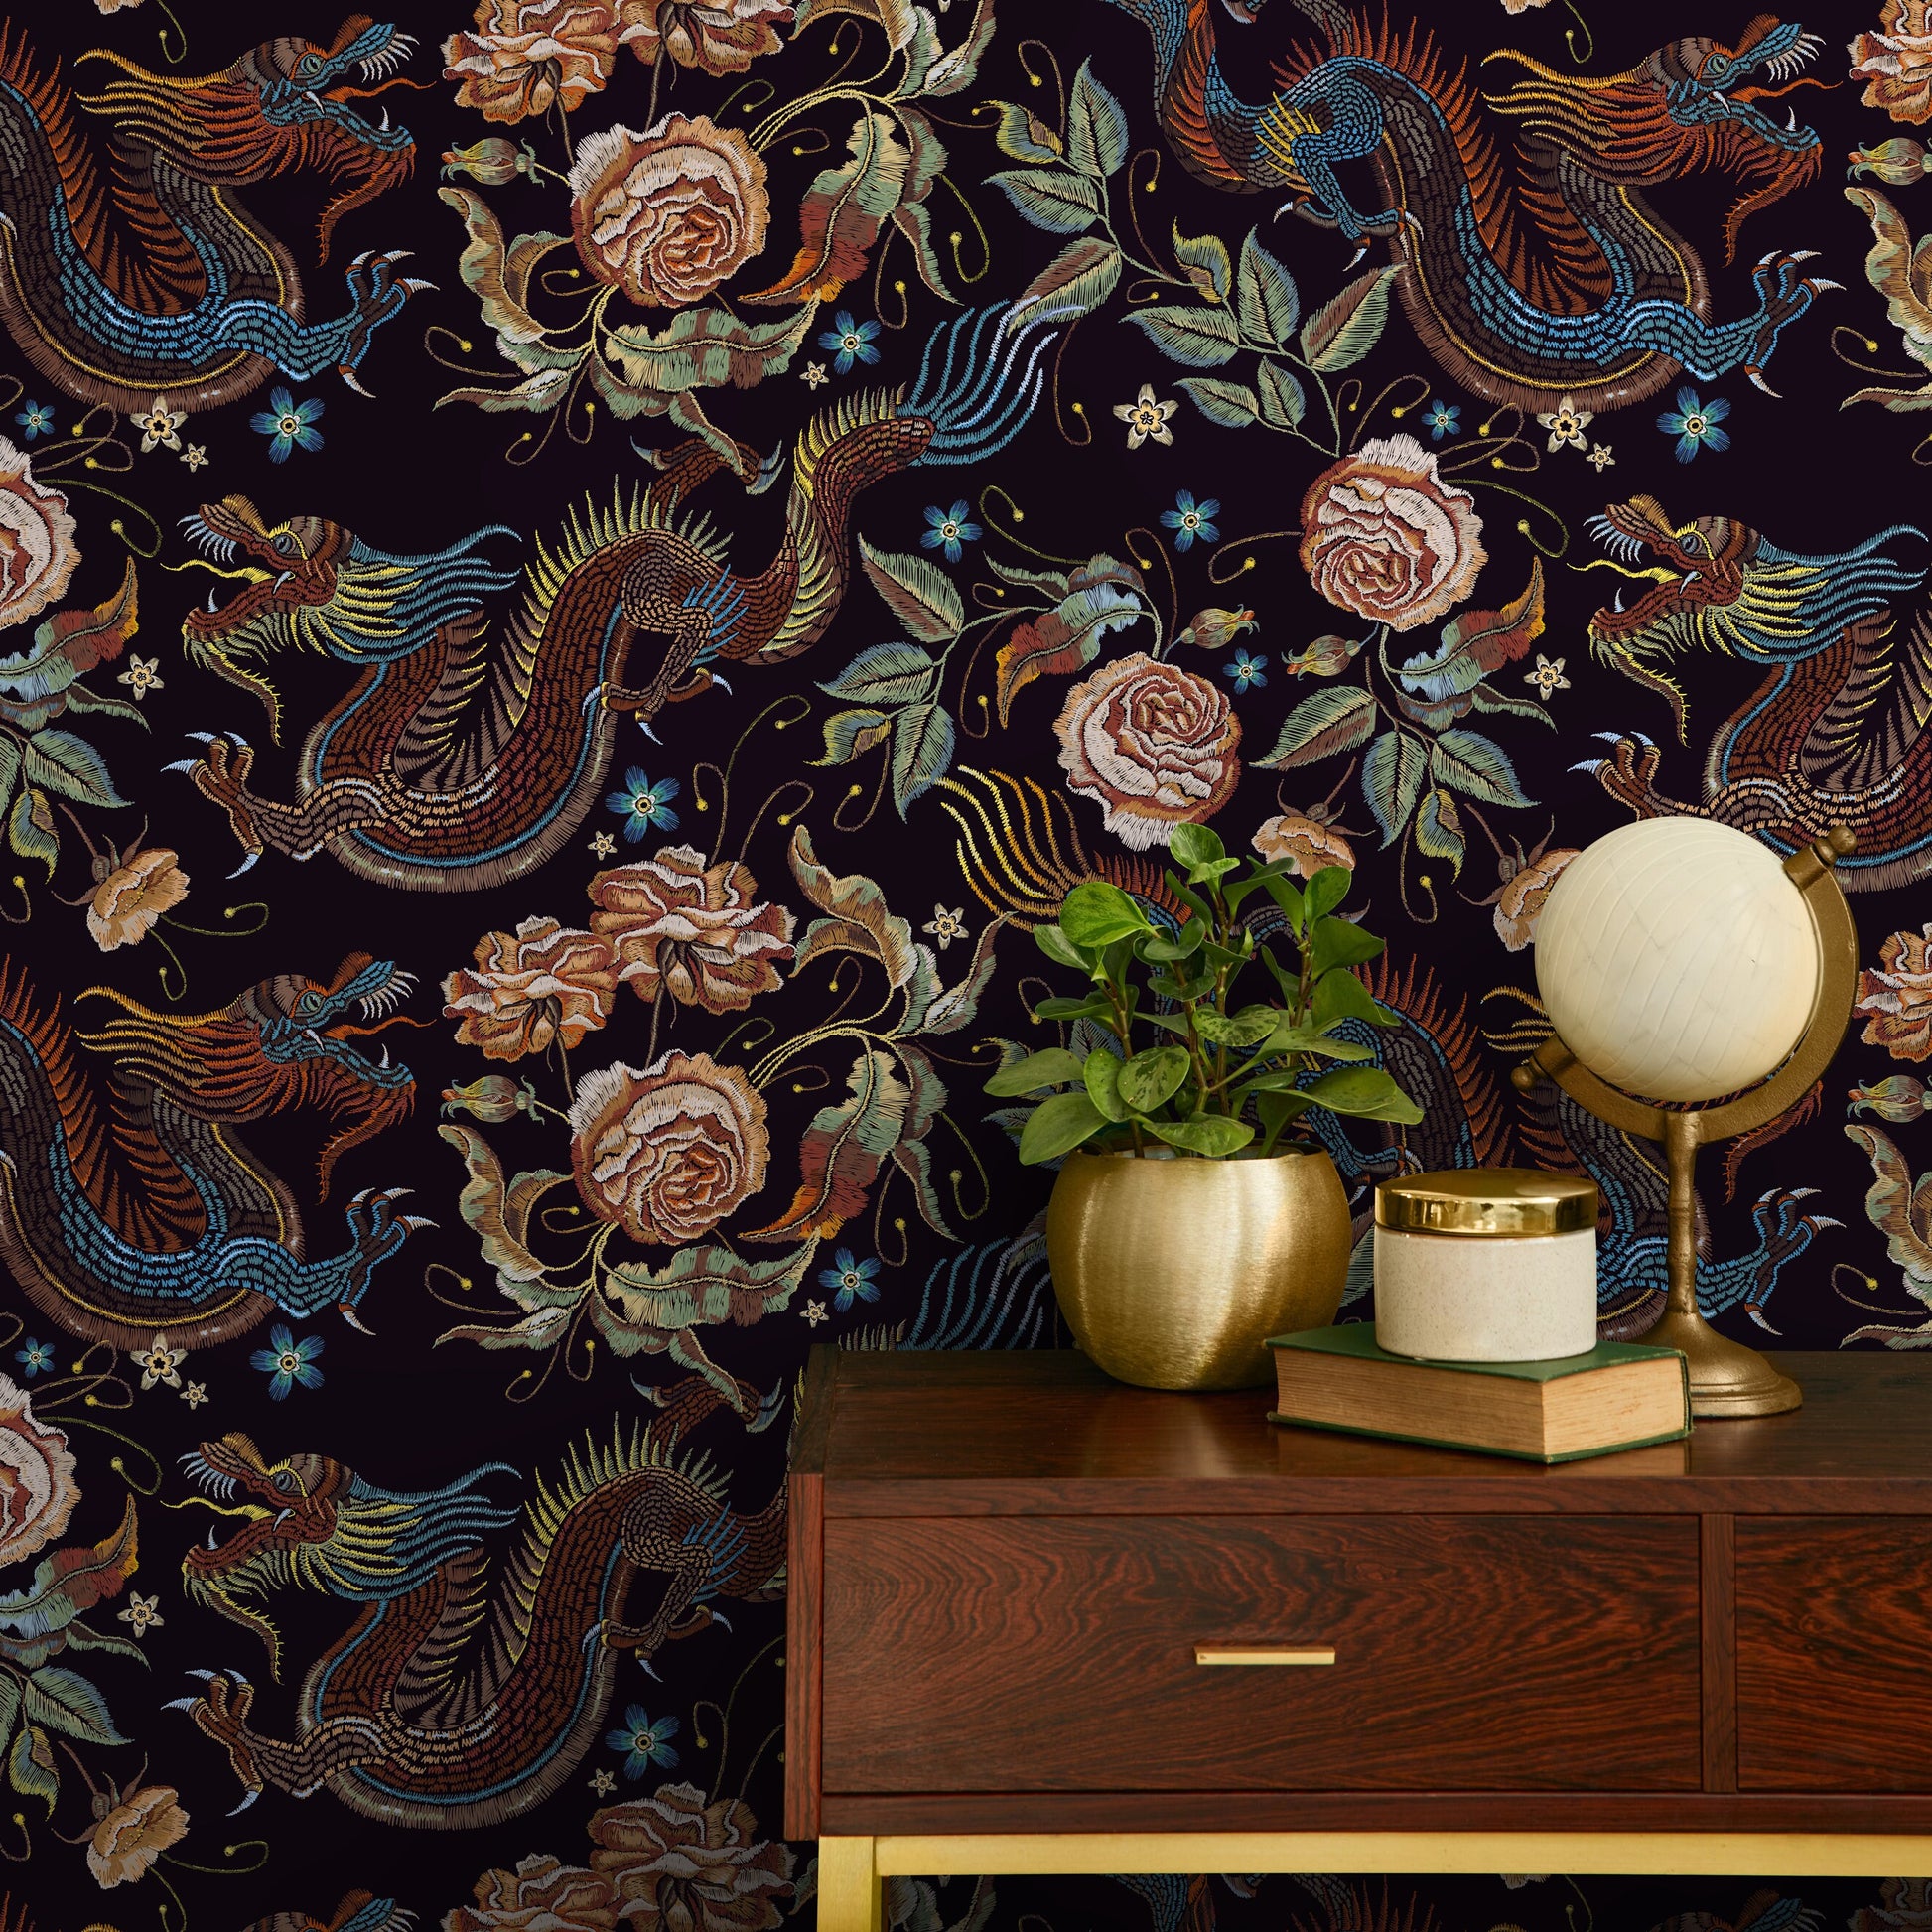 Dark Chinoiserie Wallpaper Dragon and Roses Wallpaper Peel and Stick and Traditional Wallpaper - D879